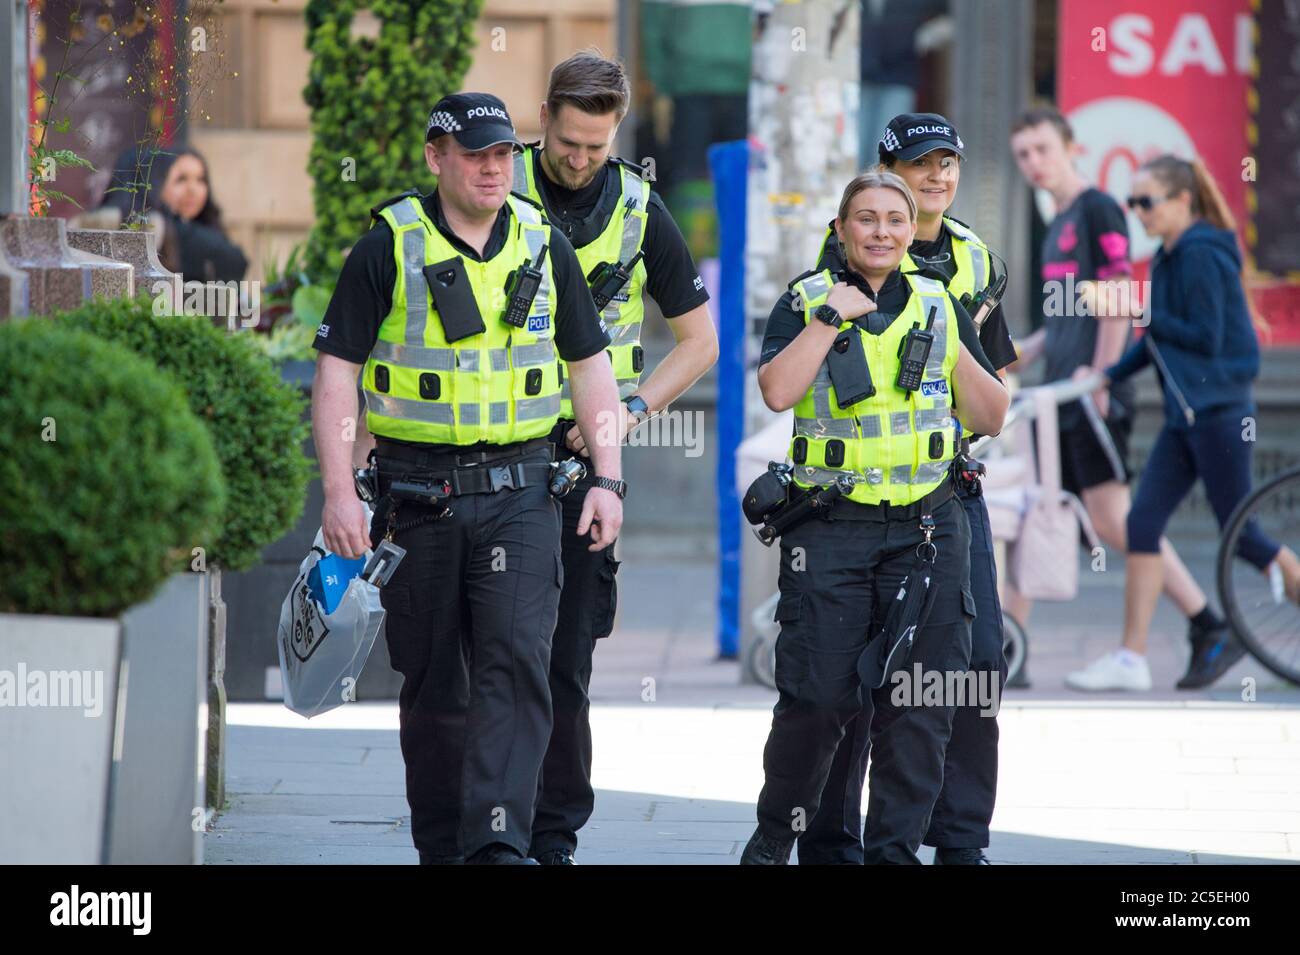 Glasgow, Scotland, UK. 2nd July, 2020. Pictured: Police officers are called to attend a suspect package which was reported on the corner of Buchanan Street and ST Vincent Street in Glasgow. Credit: Colin Fisher/Alamy Live News Stock Photo